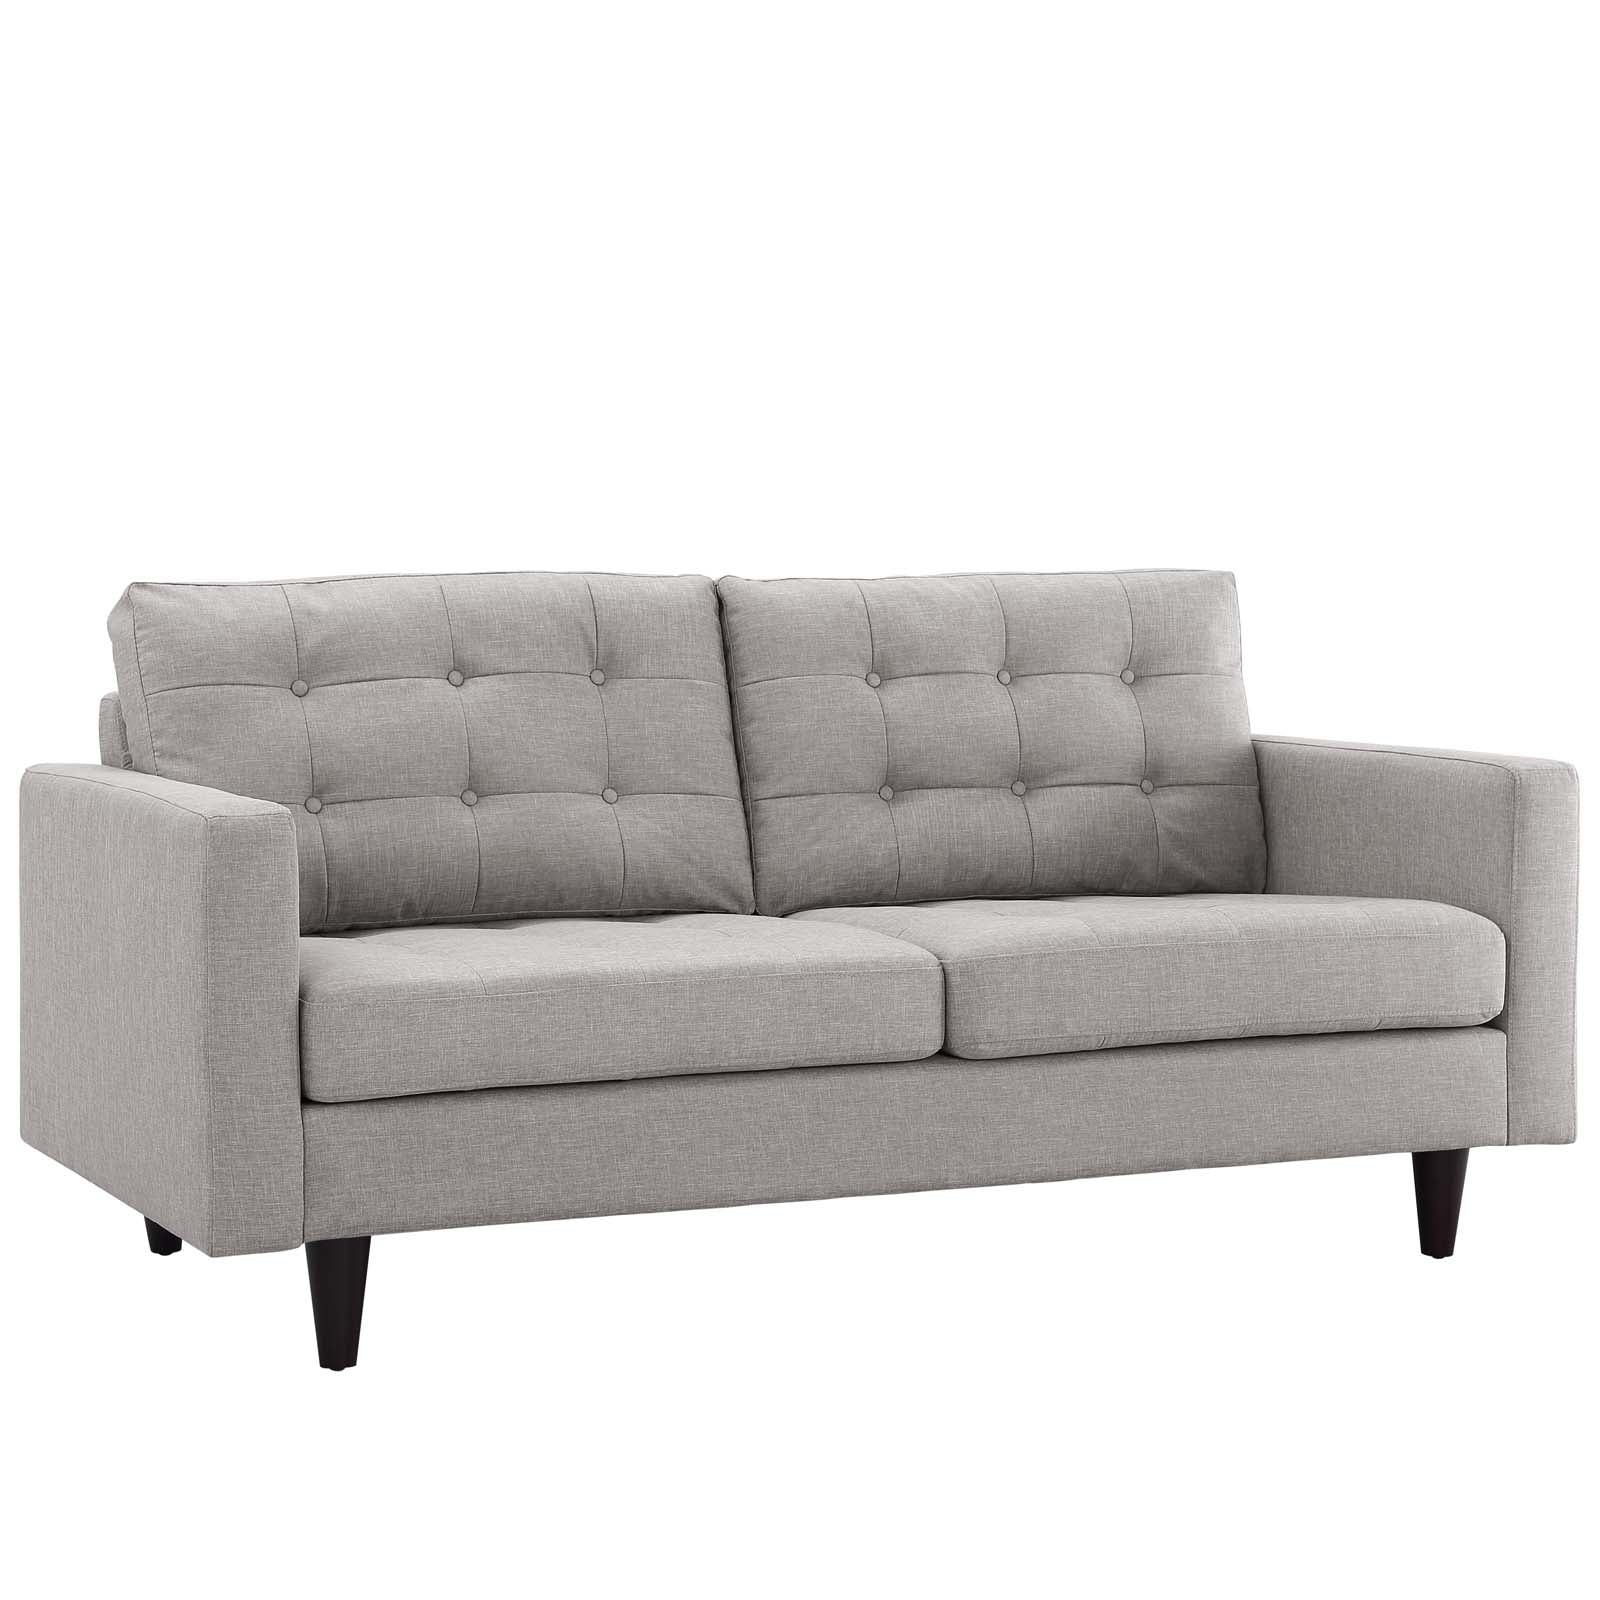 Modway Living Room Sets - Empress Sofa, Loveseat and Armchair ( Set Of 3 ) Light Gray